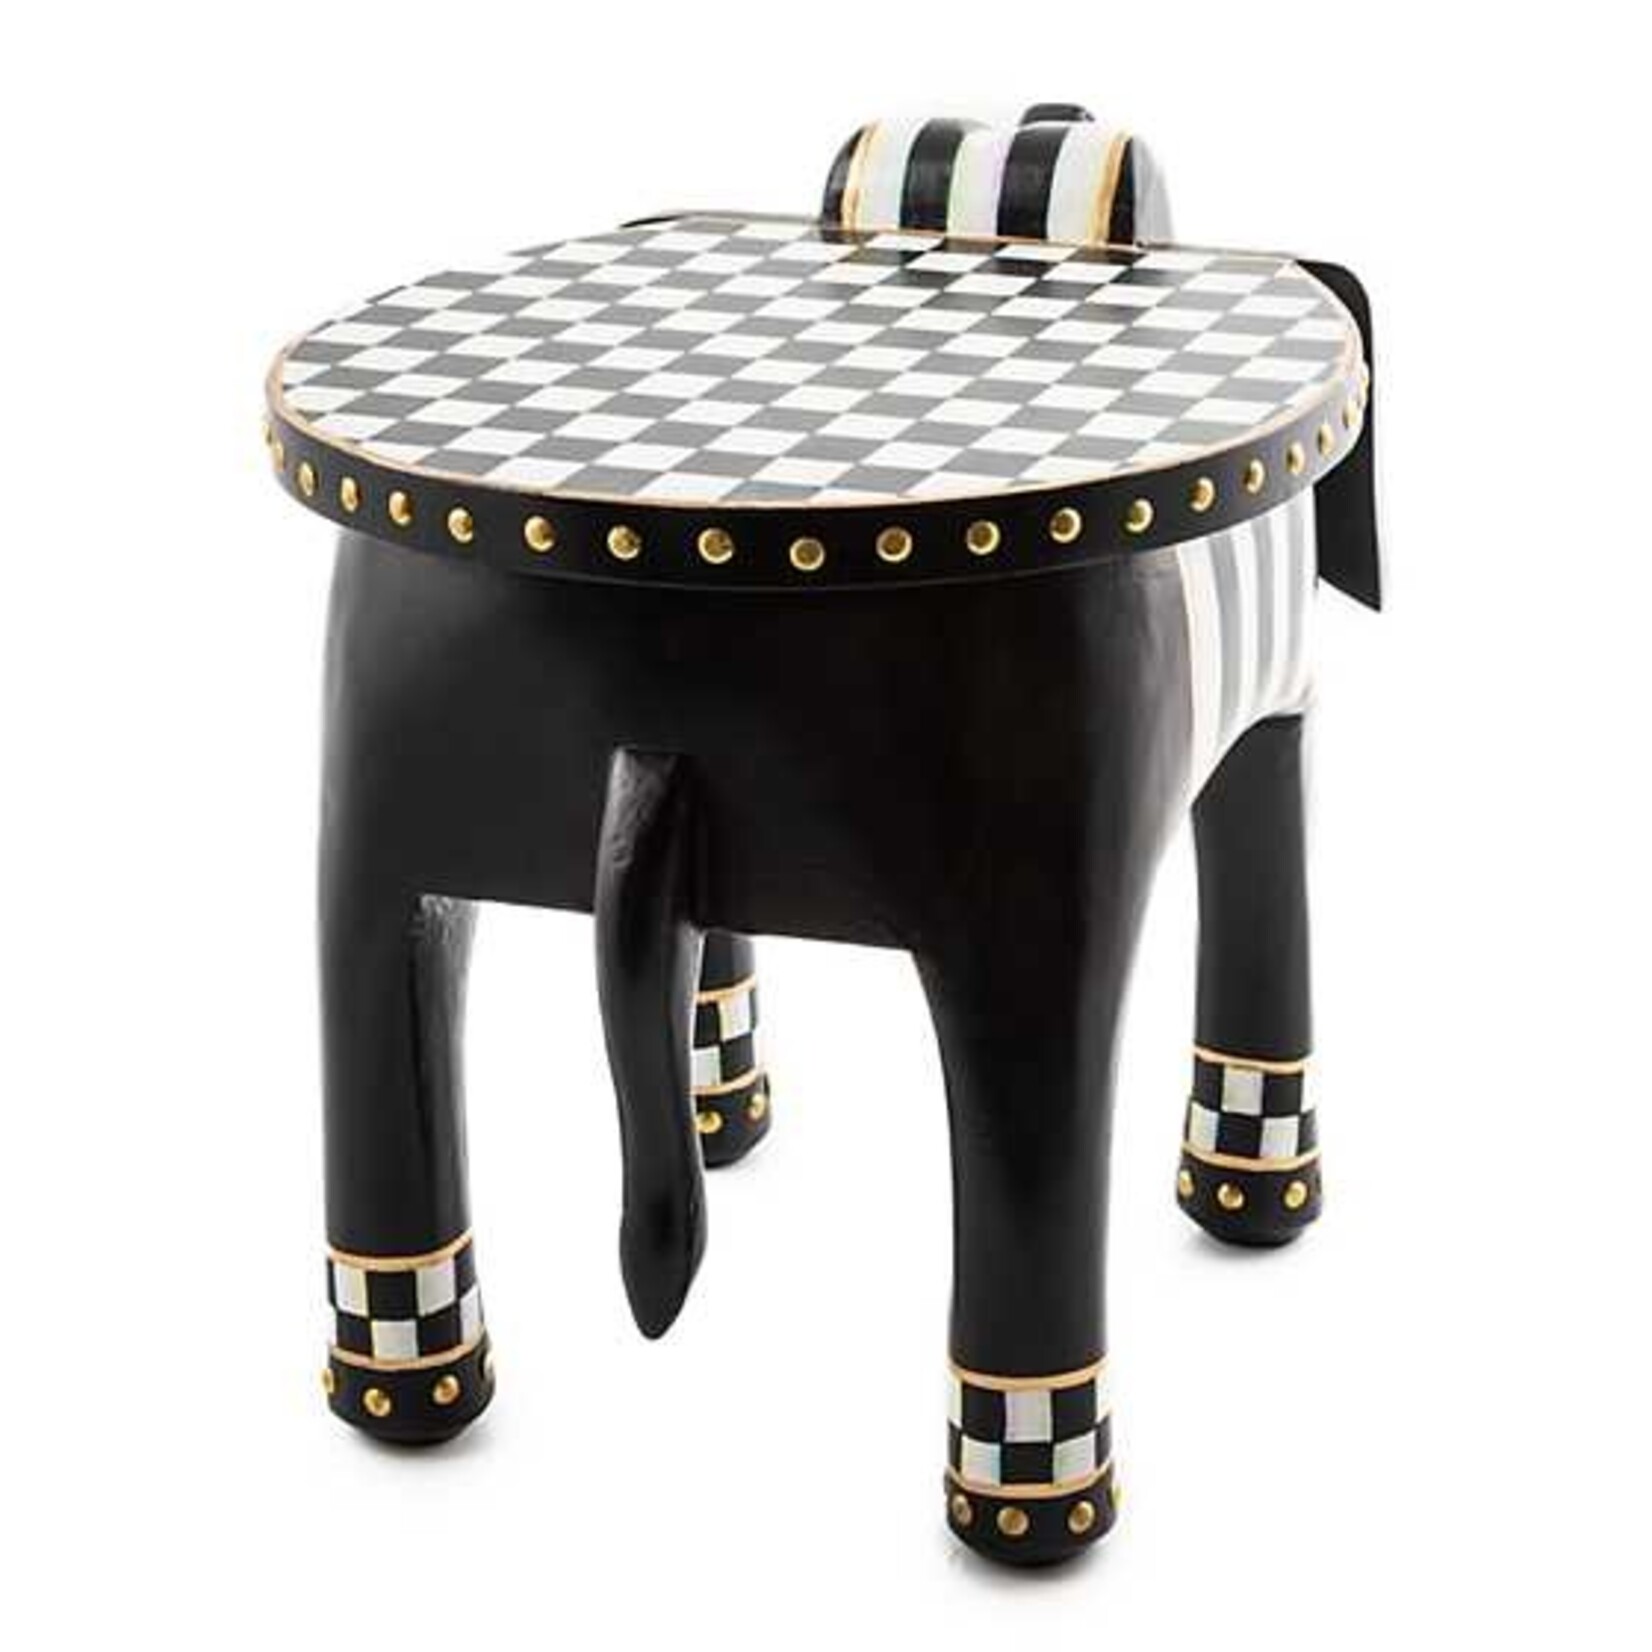 MacKenzie-Childs Elephant Accent Table